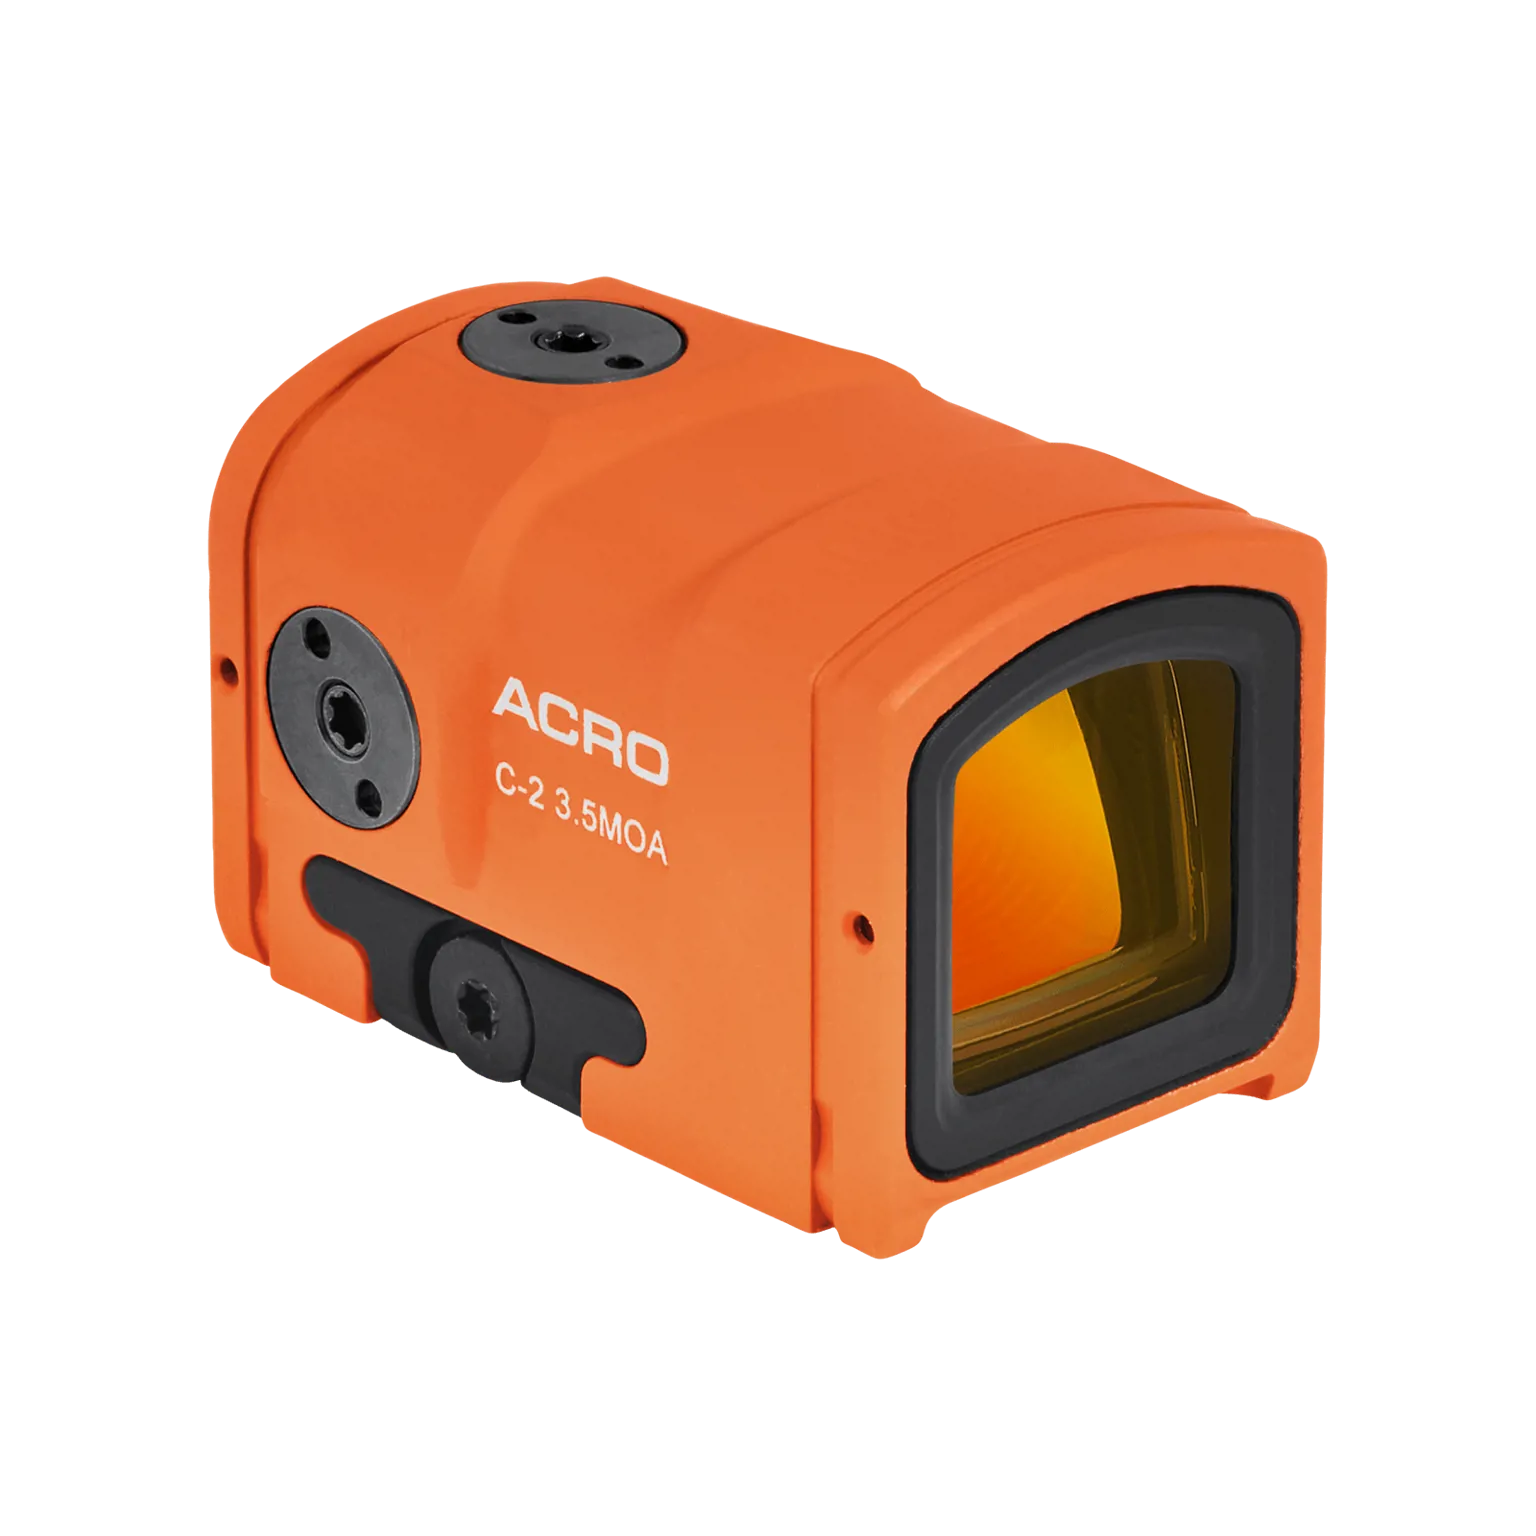 Acro C-2™ Orange 3.5 MOA - Red dot reflex sight with integrated Acro™ interface - 3